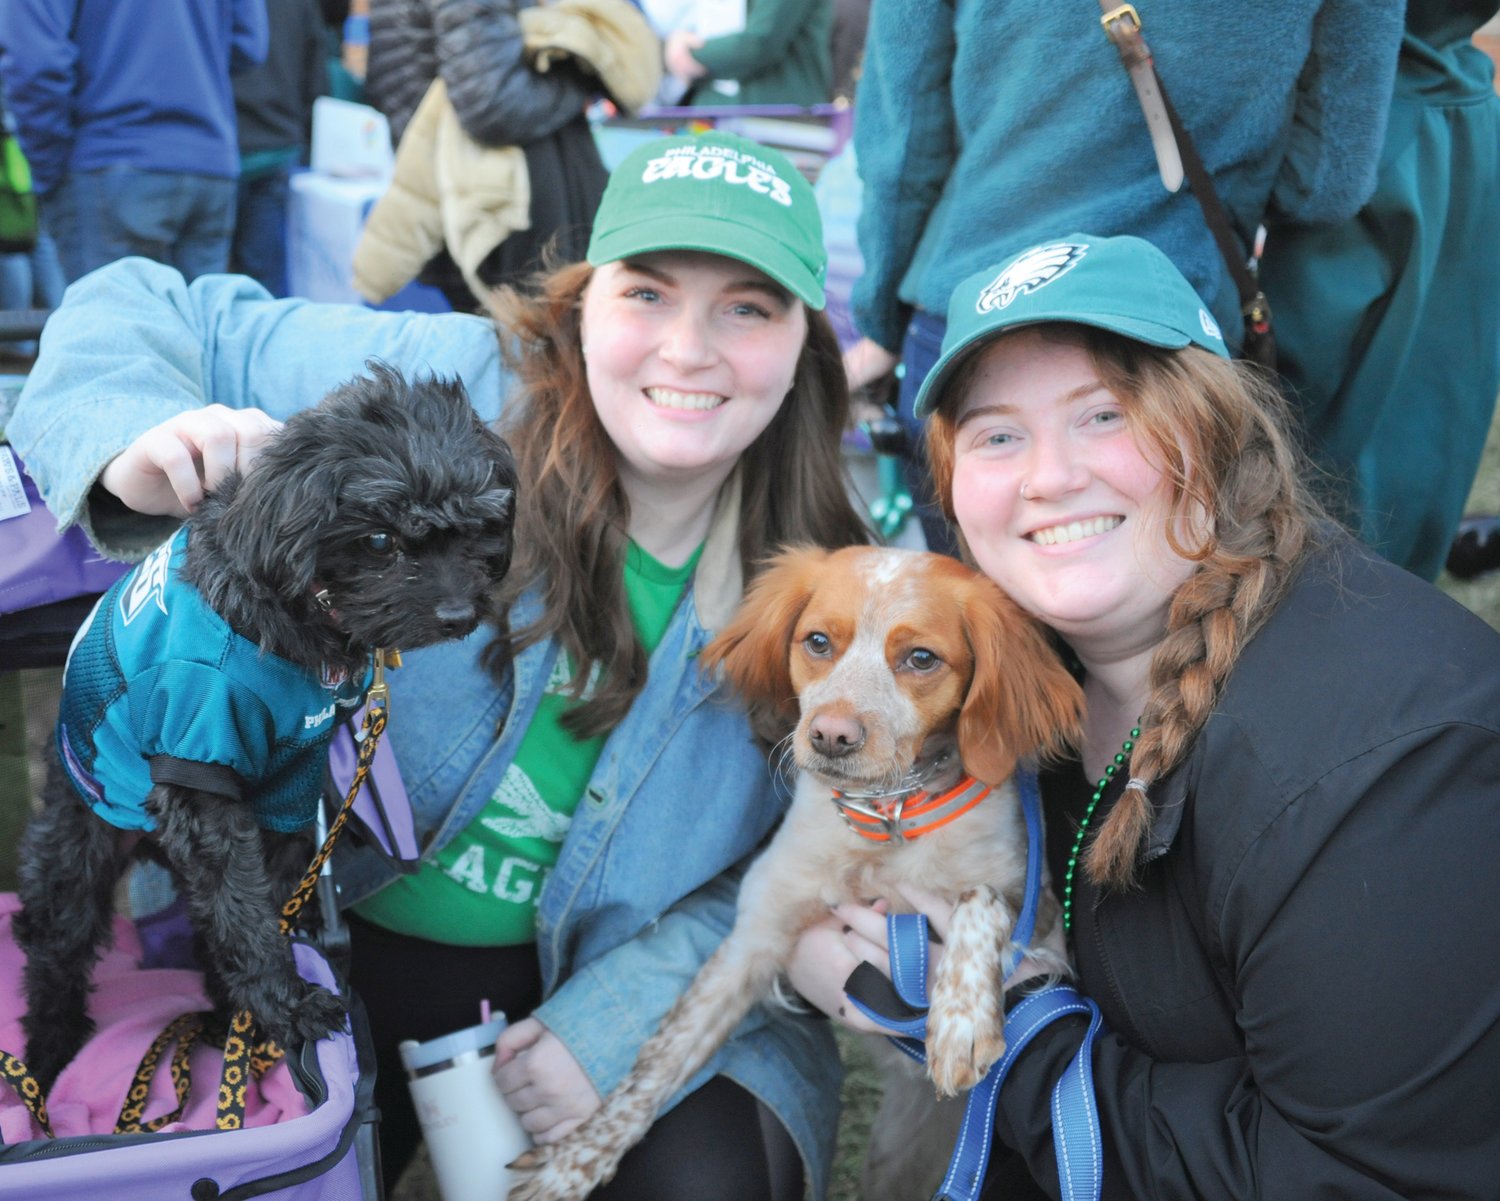 Maeve and Ayla Corr brought their pups Millie and Fallon to the Herald’s “Bucks County Loves the Birds” pep rally Friday evening in Doylestown.